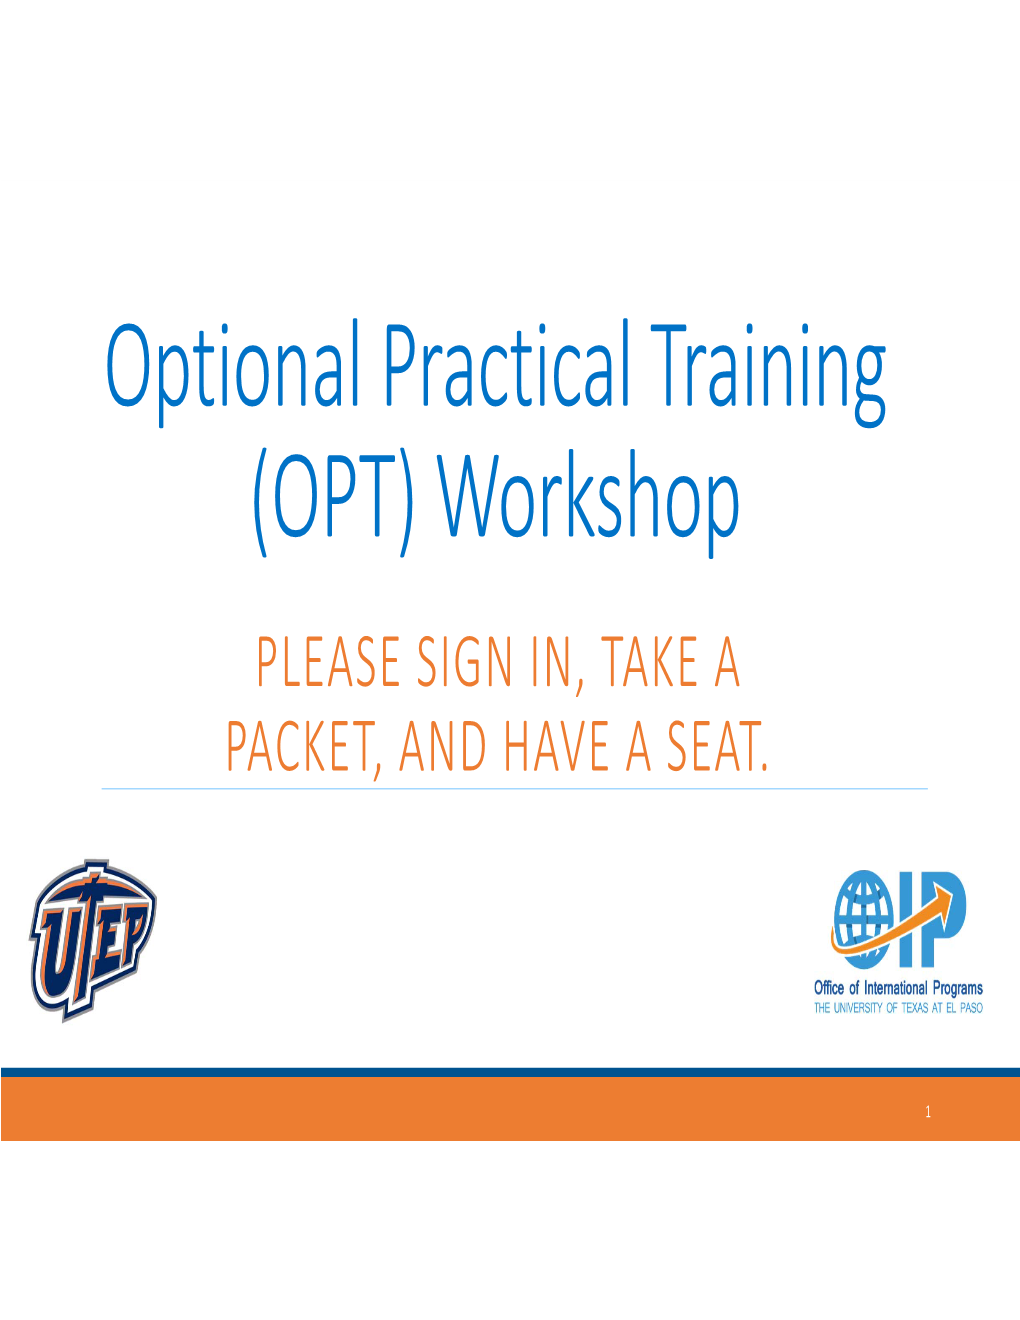 Optional Practical Training (OPT) Workshop PLEASE SIGN IN, TAKE a PACKET, and HAVE a SEAT